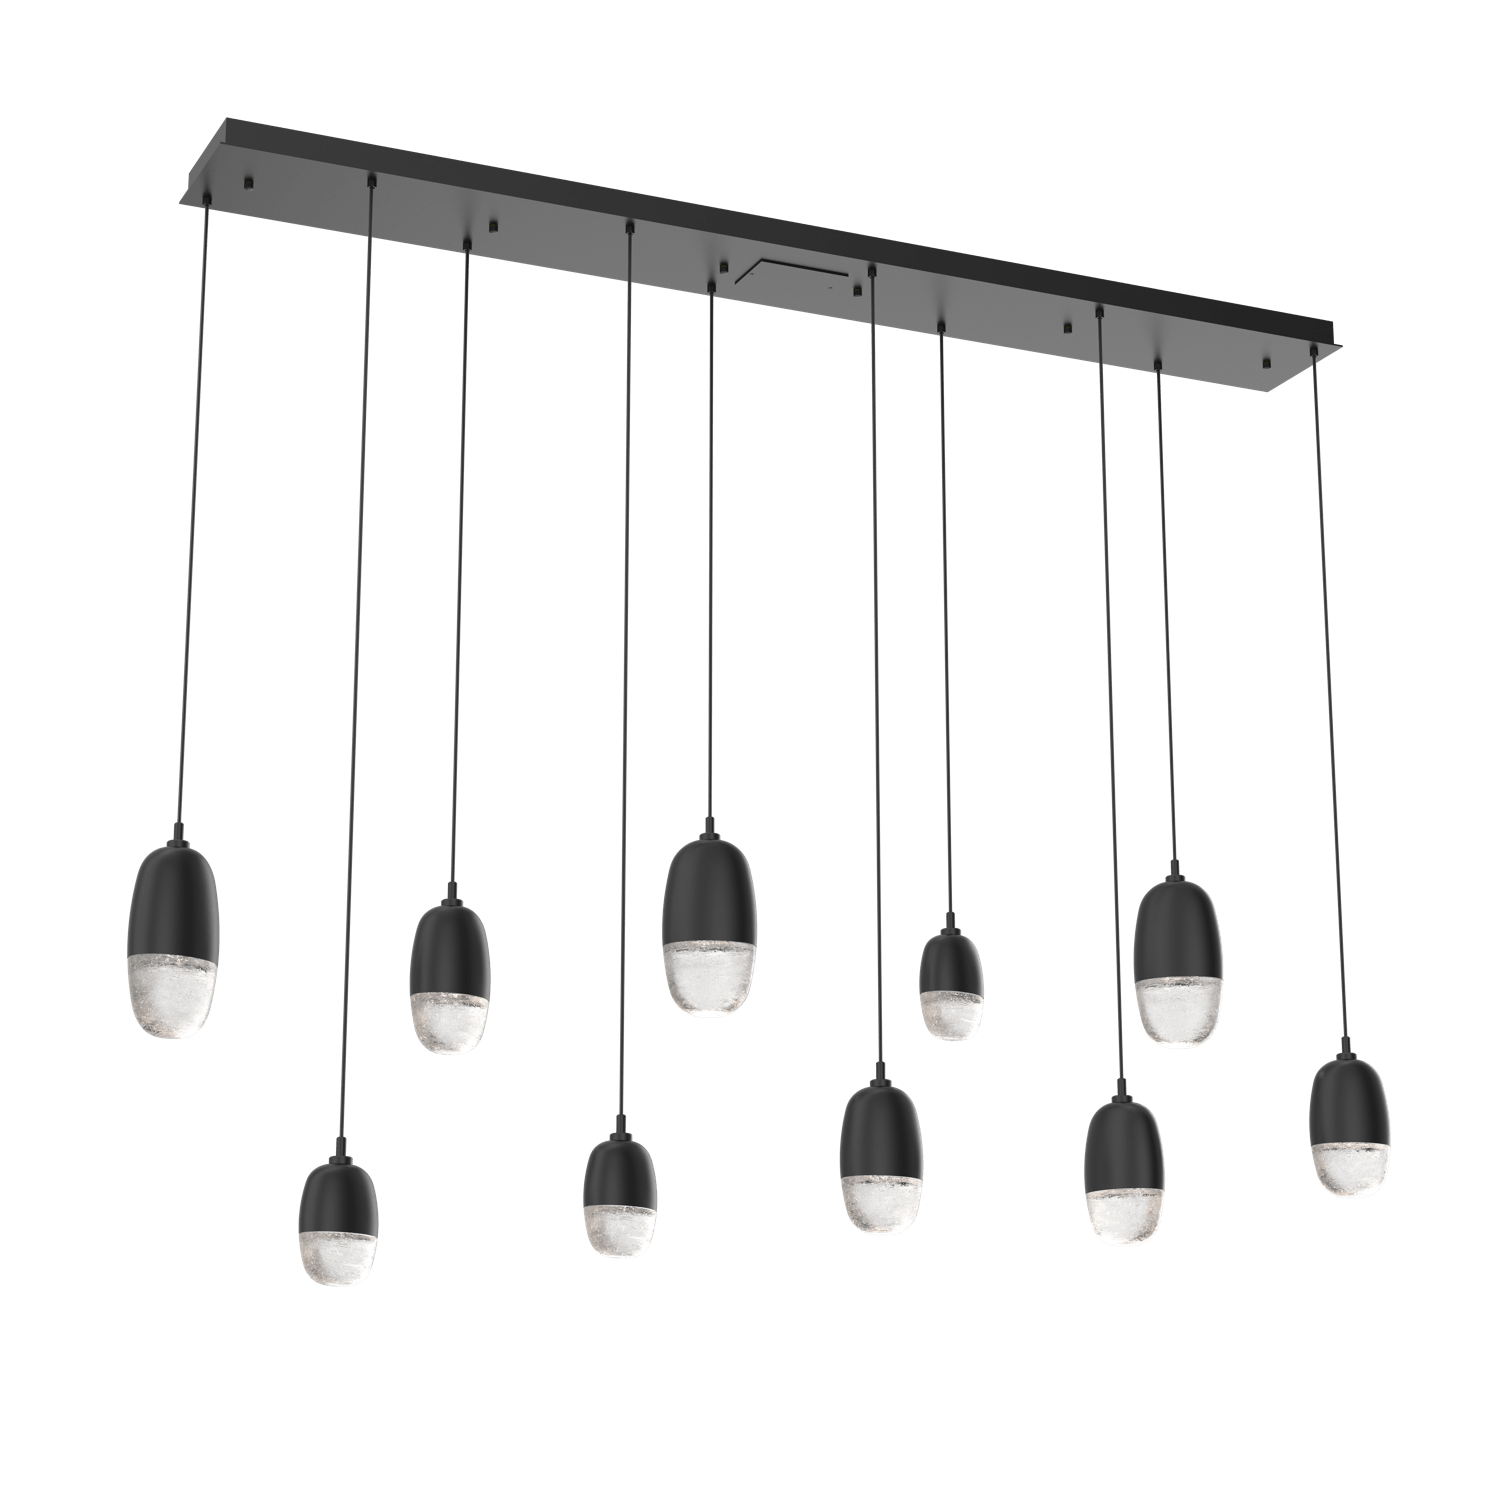 PLB0079-09-MB-Hammerton-Studio-Pebble-9-light-linear-pendant-chandelier-with-matte-black-finish-and-clear-cast-glass-shades-and-LED-lamping